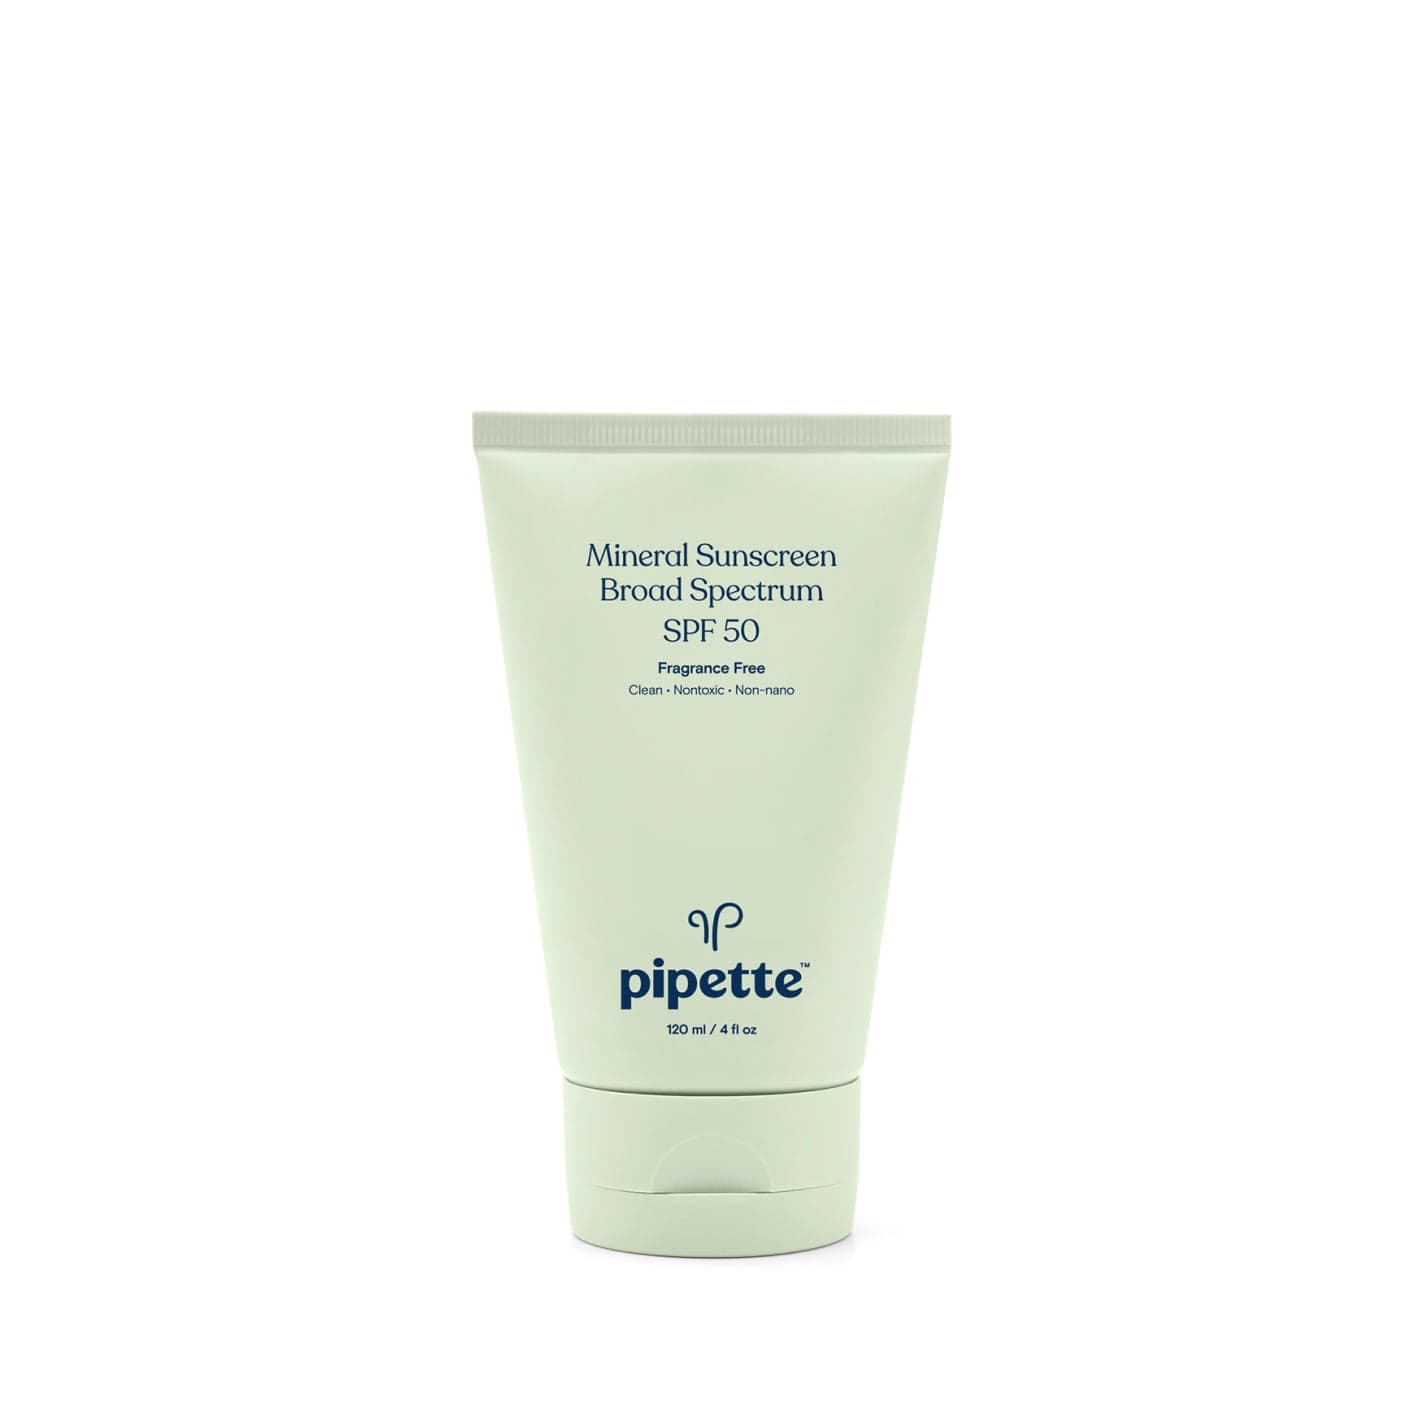 mineral sunscreen broad spectrum SPF 50 by pipette baby